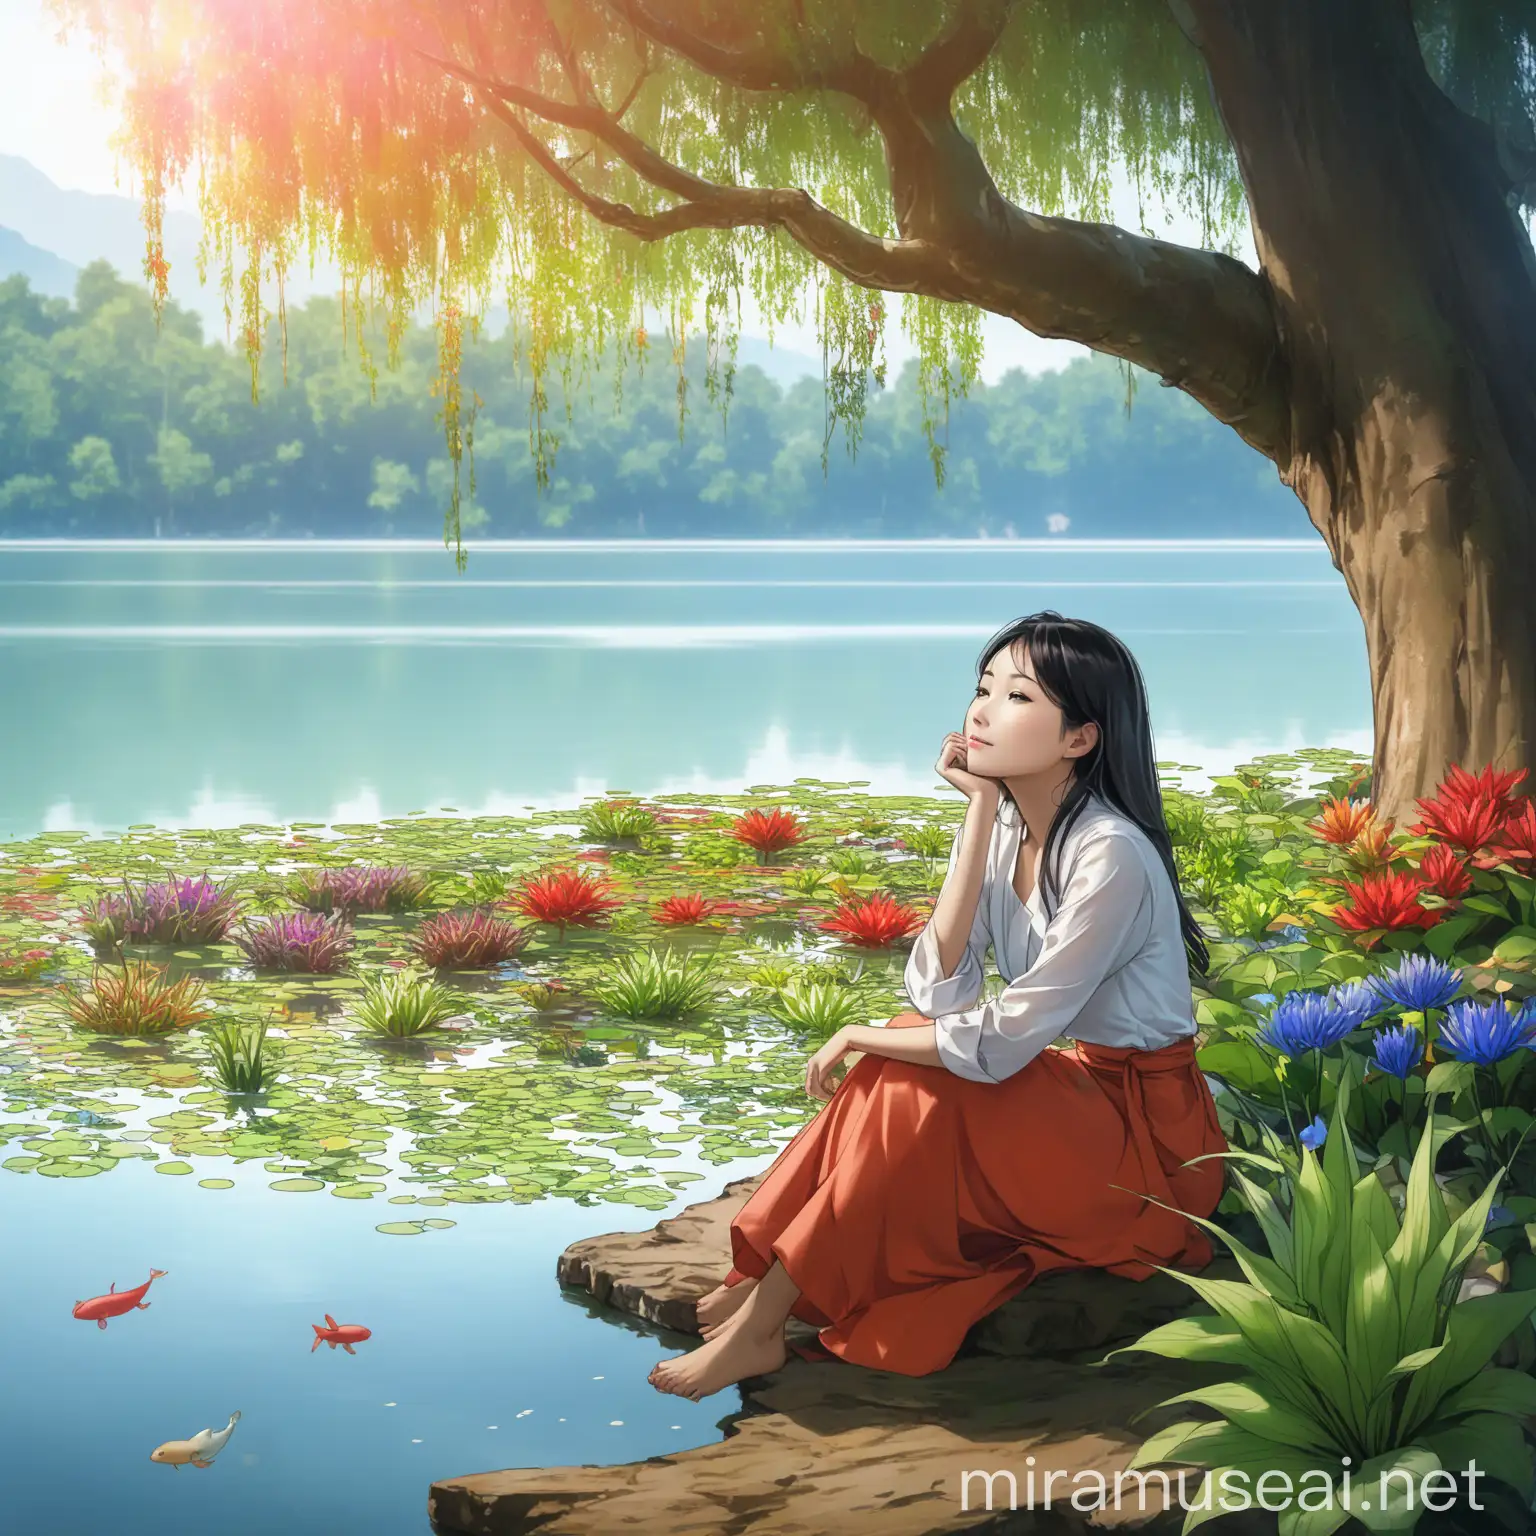 Asian Woman Daydreaming Under Tree by Colorful Lake